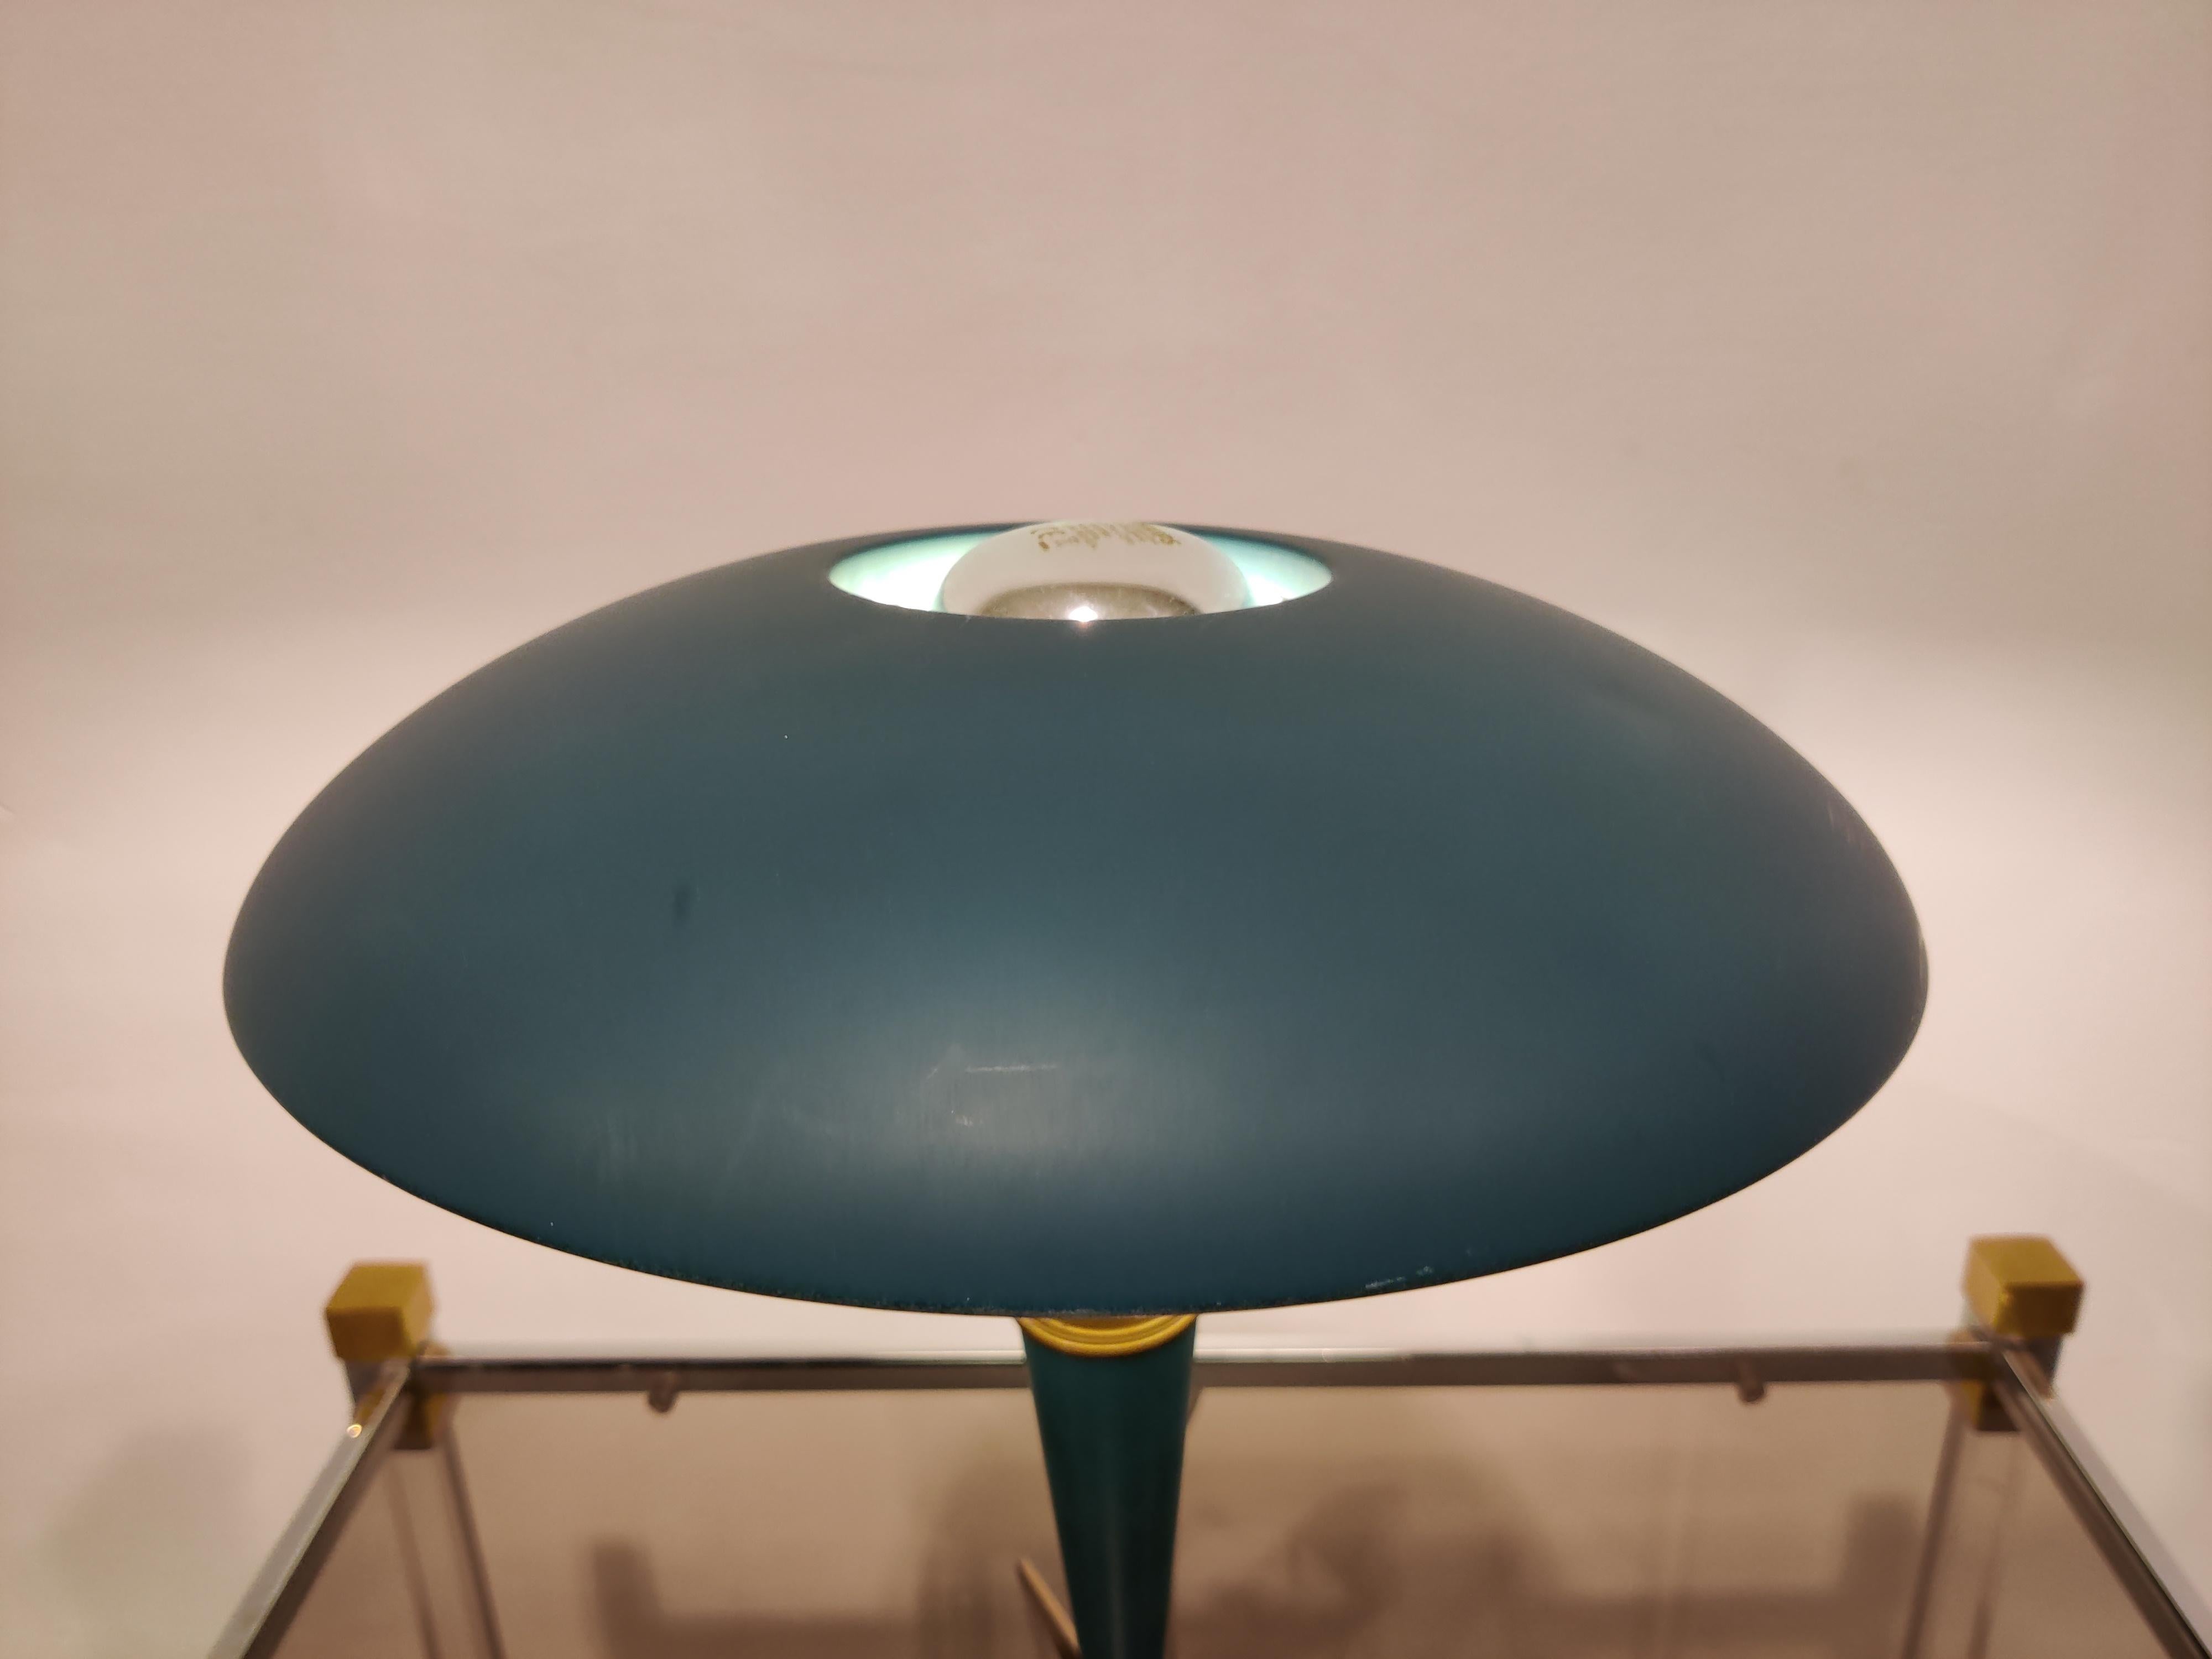 This midcentury table lamp model 'bijou' by Louis Kalff was introduced in the 1950s but it still looks modern today. 

The lampshade and base are made from blue/green metal, light enamel inner layer of the lamp shade to emit a soft light.

The